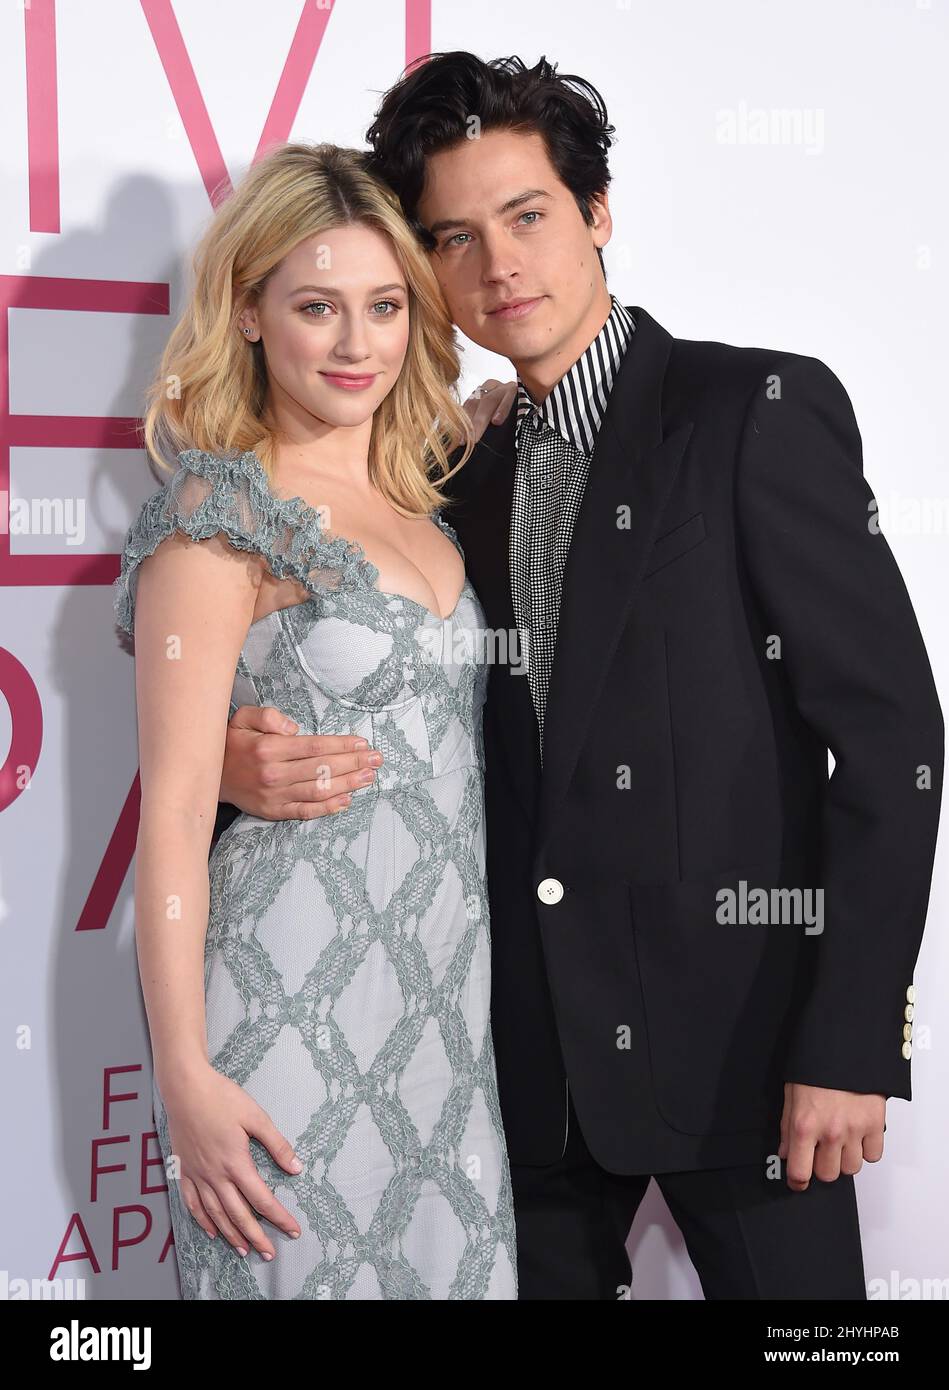 Lili Reinhart and Cole Sprouse attending the premiere of Five Feet Apart in Los Angeles, California Stock Photo